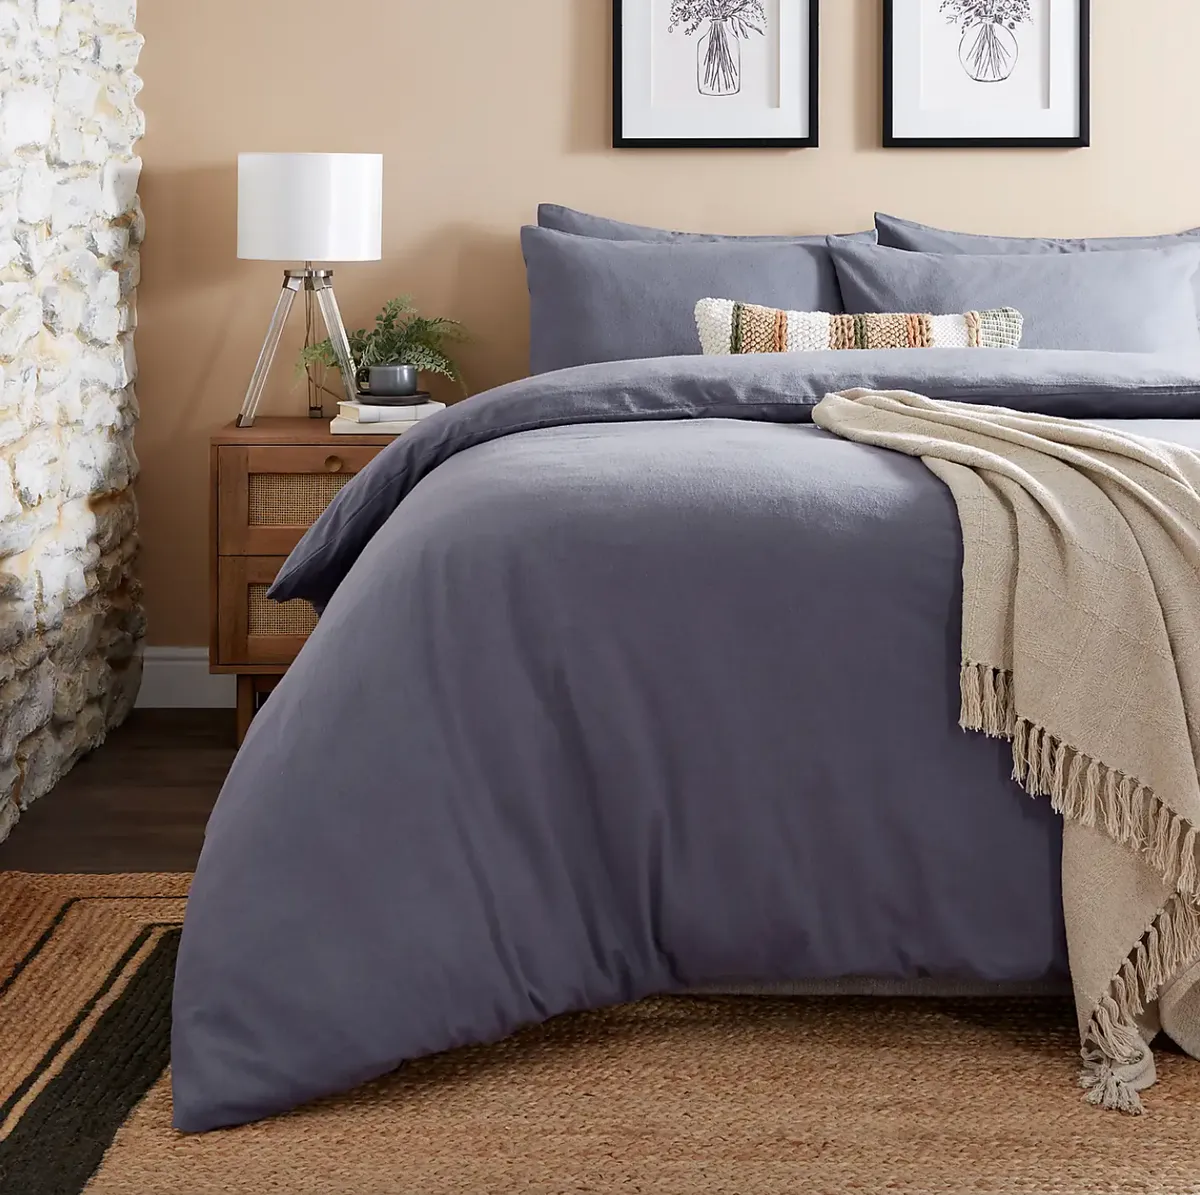 Simply 100% Brushed Cotton Duvet Cover and Pillowcase Set